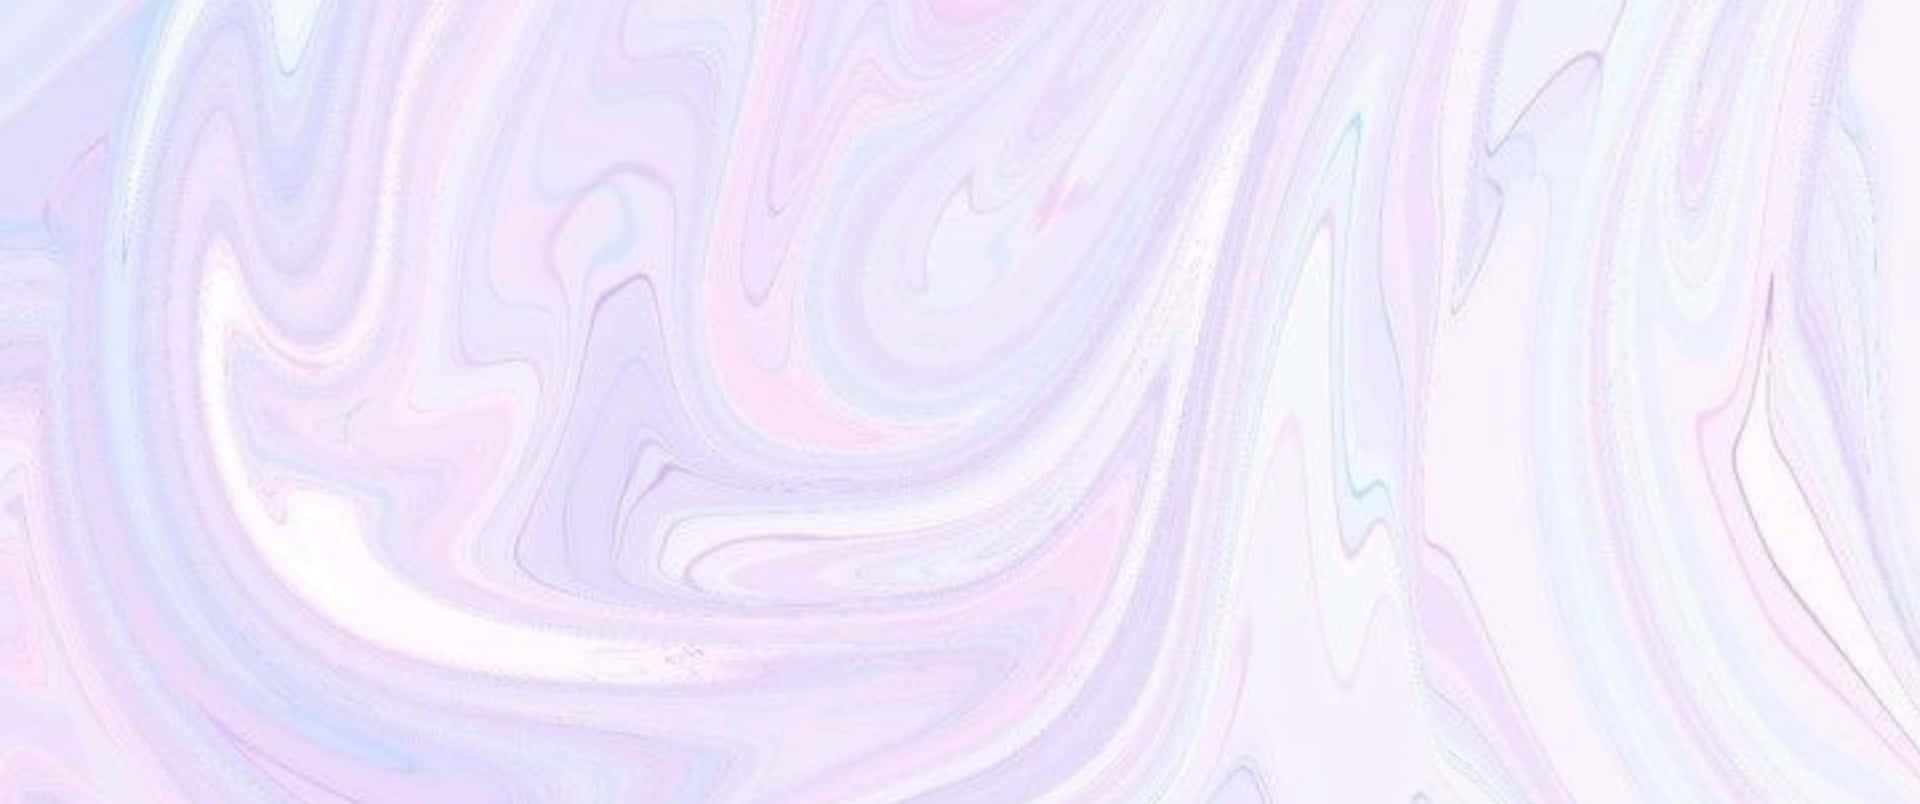 Abstract Purple and White Striped Background